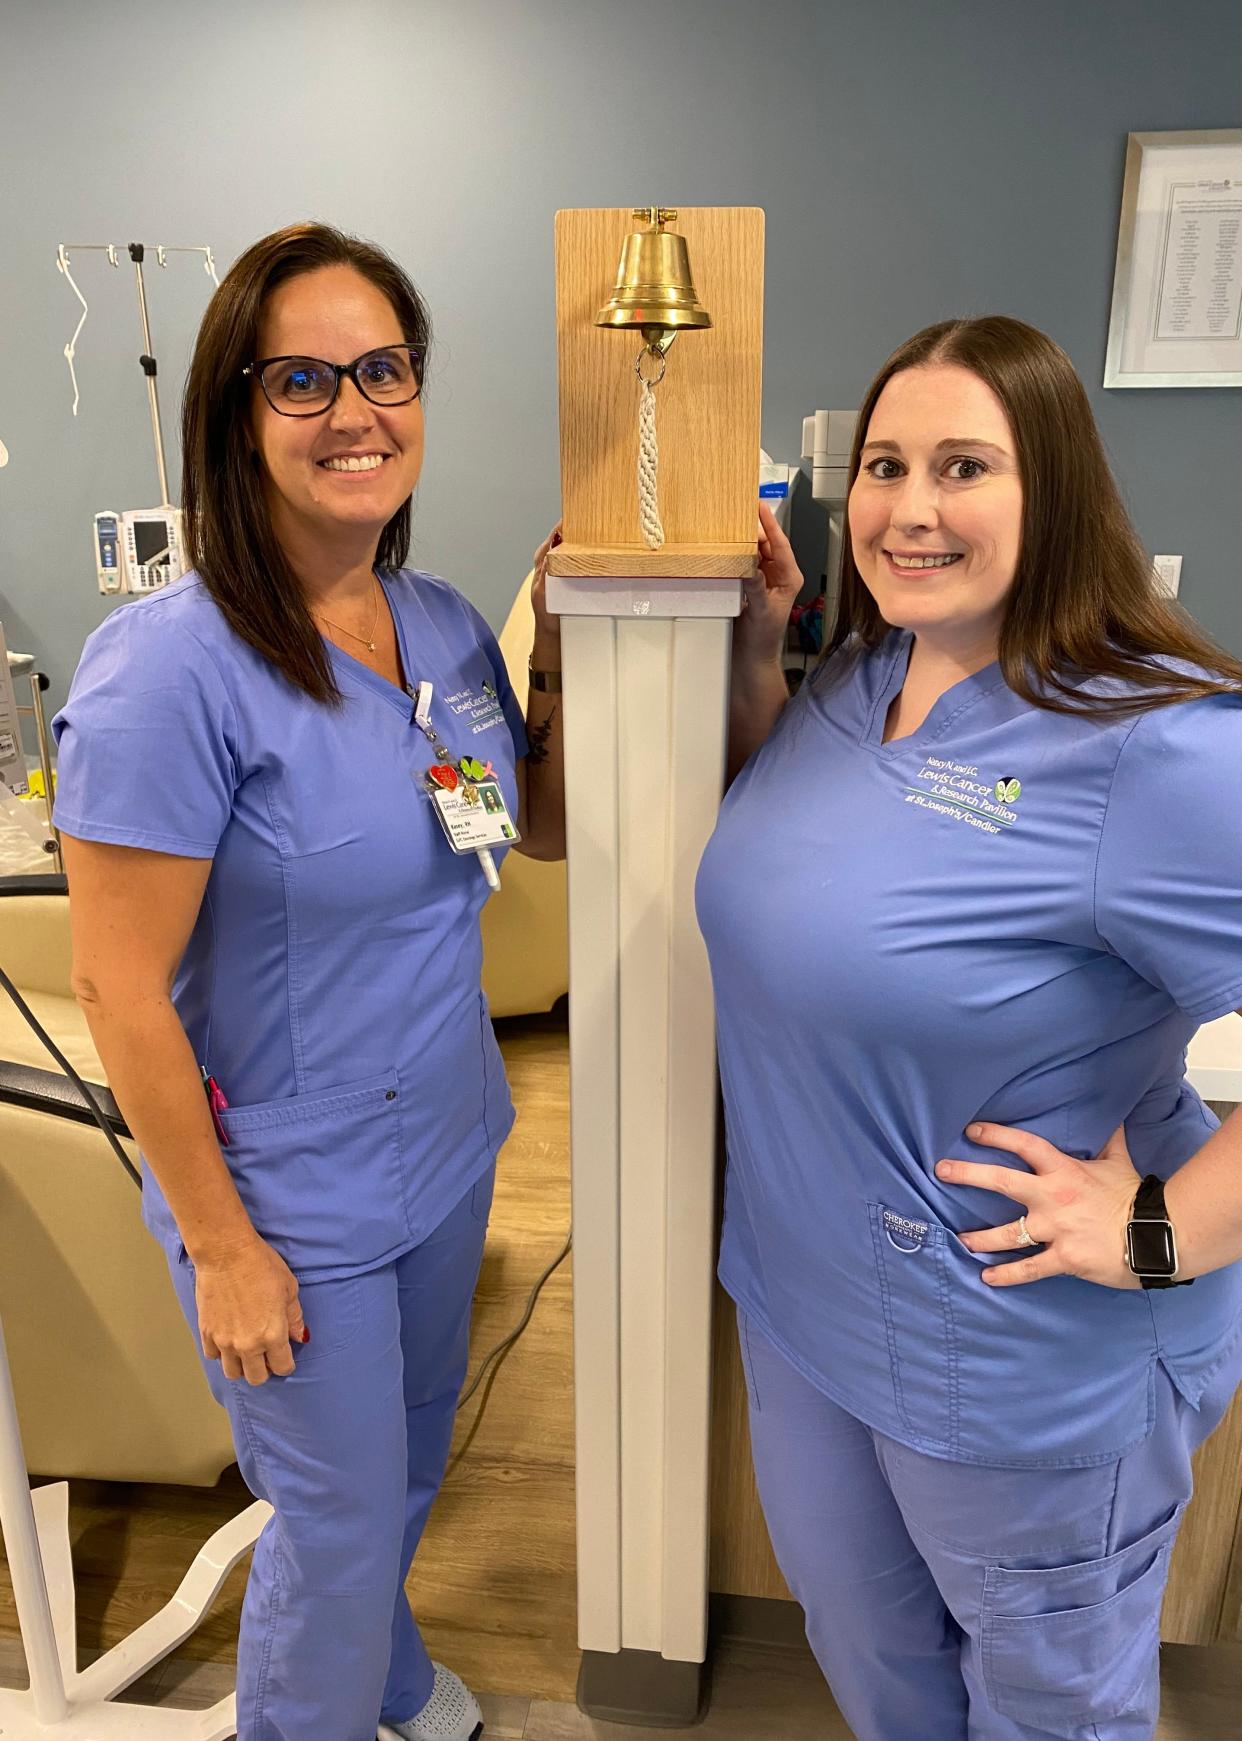 Oncology nurses Kasey Strickland and Celeste Wiggins at the celebratory bell patients ring when they complete their treatments